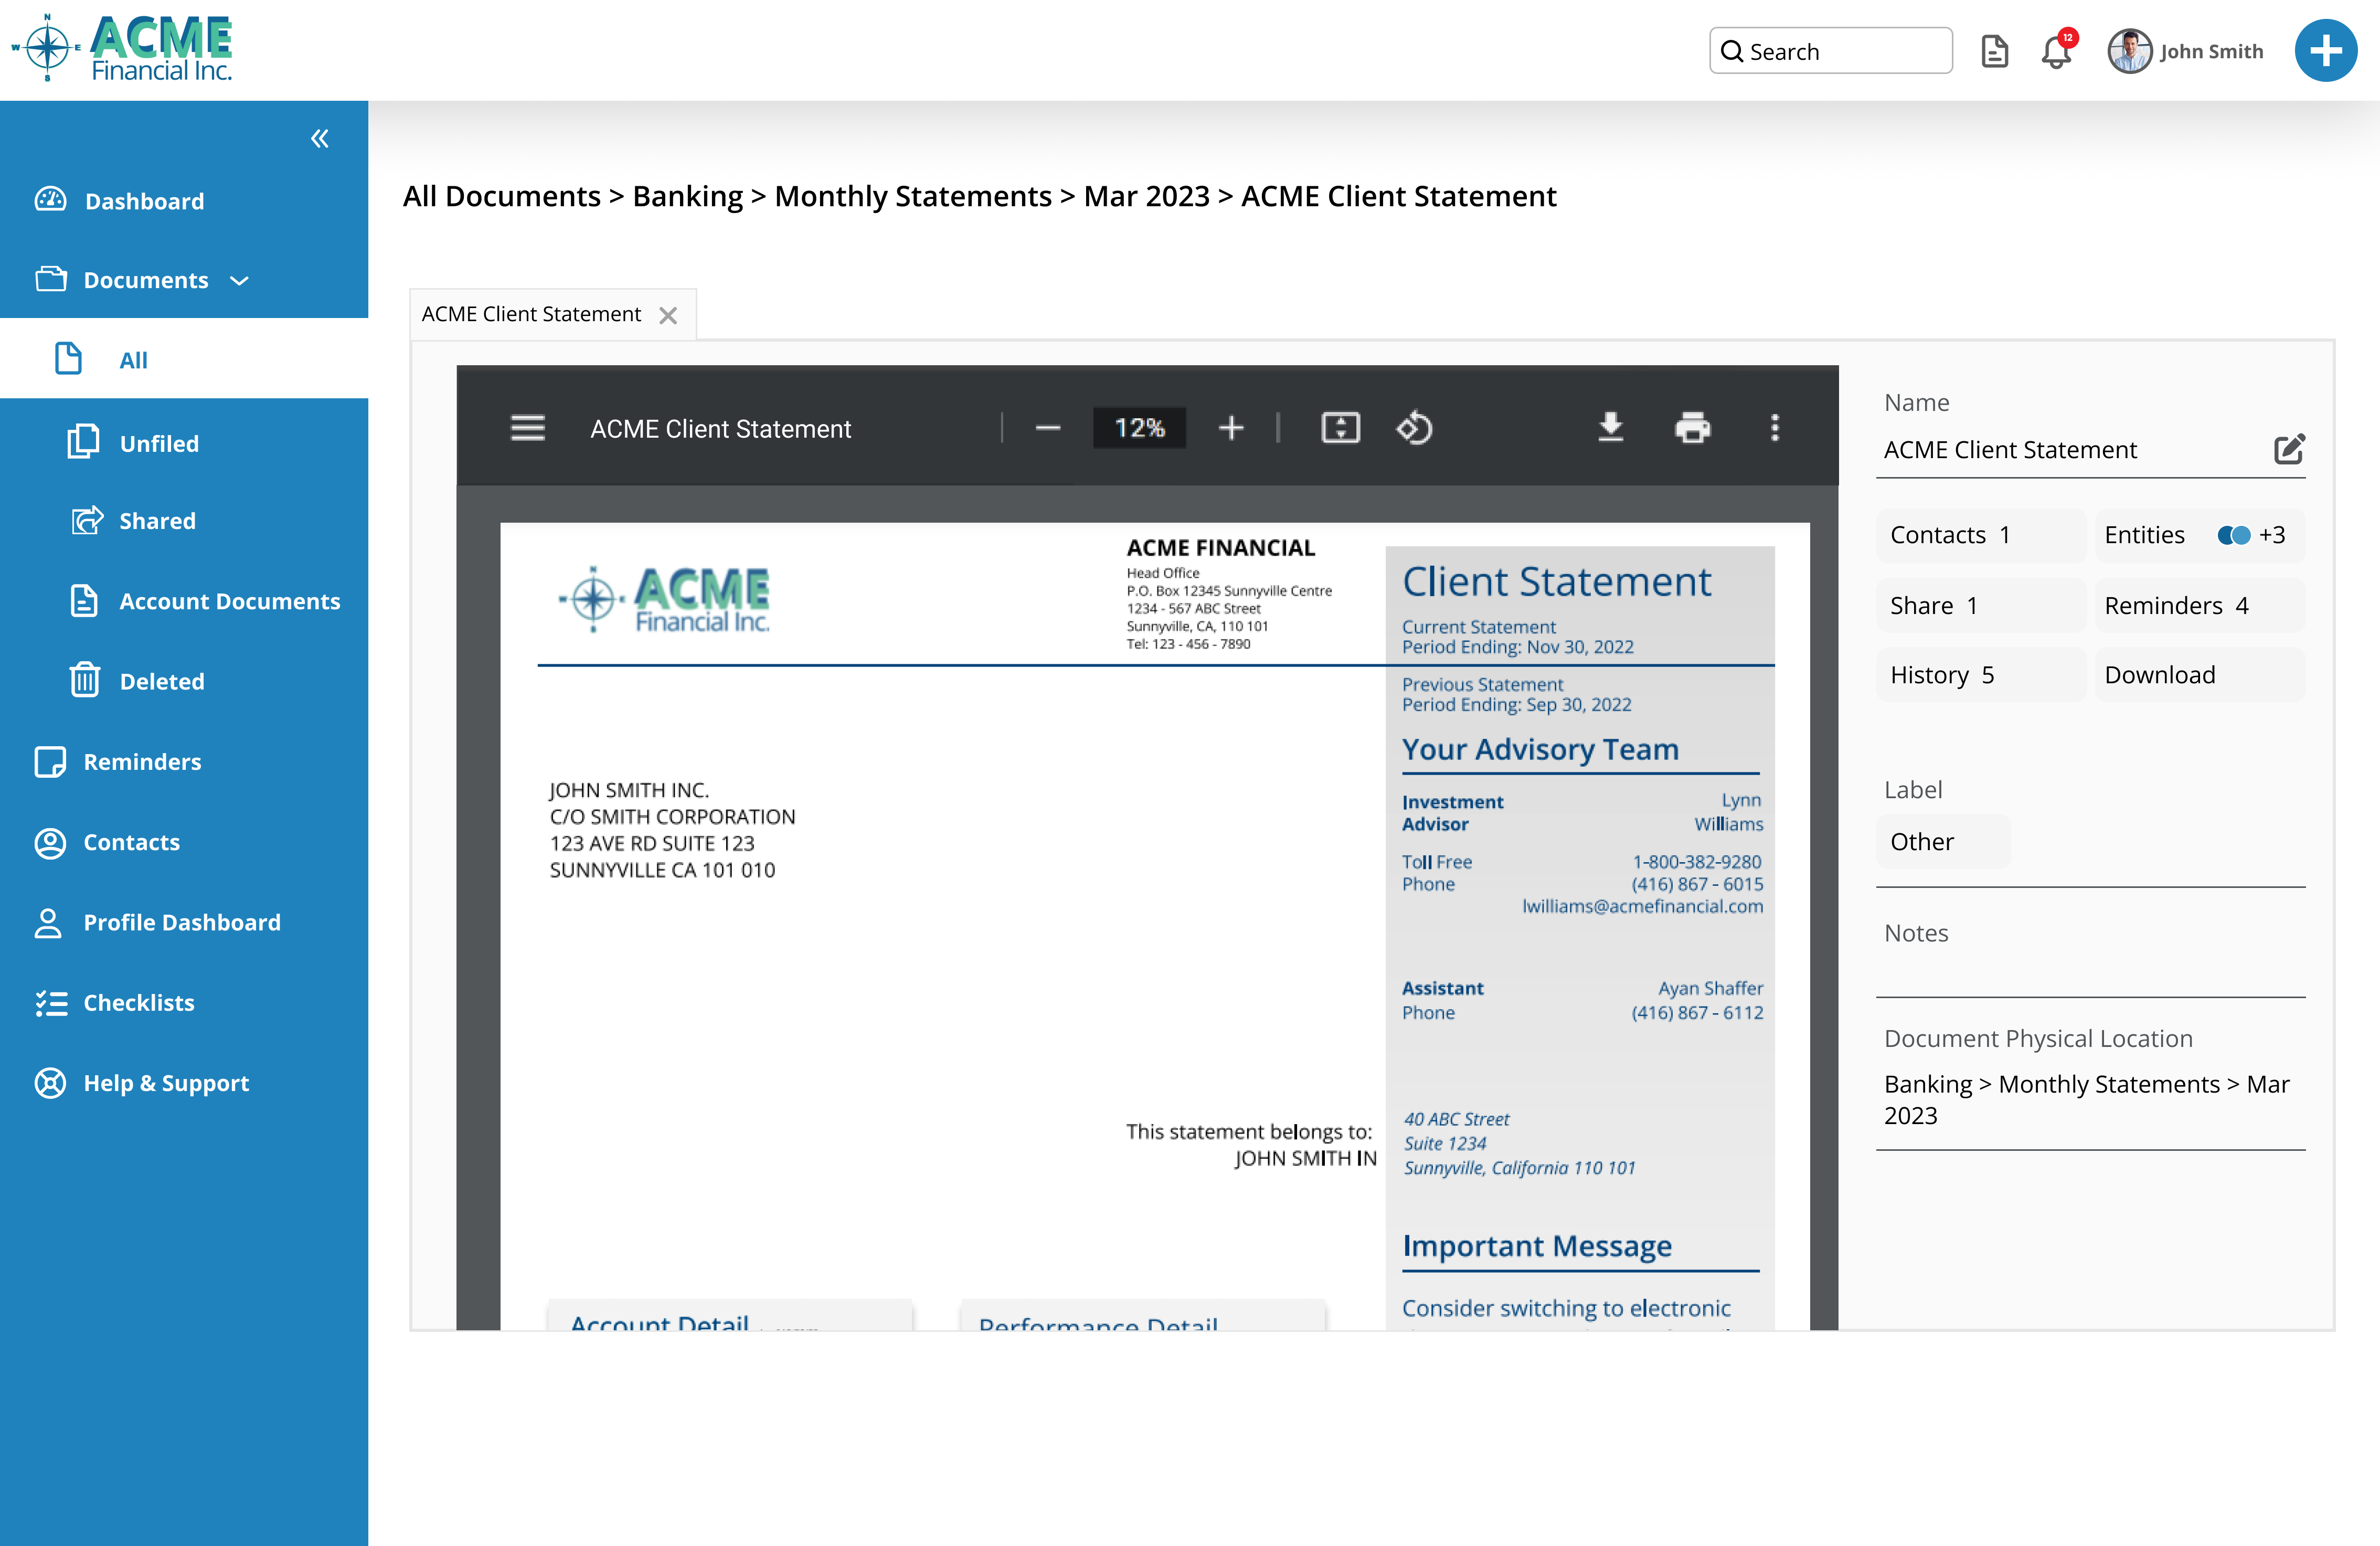 Manage enterprise, advisor, and client documents directly within the Vault. Add a second screen with checkmarks for: Associated Contacts, Audit Trail, Secure File Sharing, Entity Management, Document Reminders, Labels & Notes